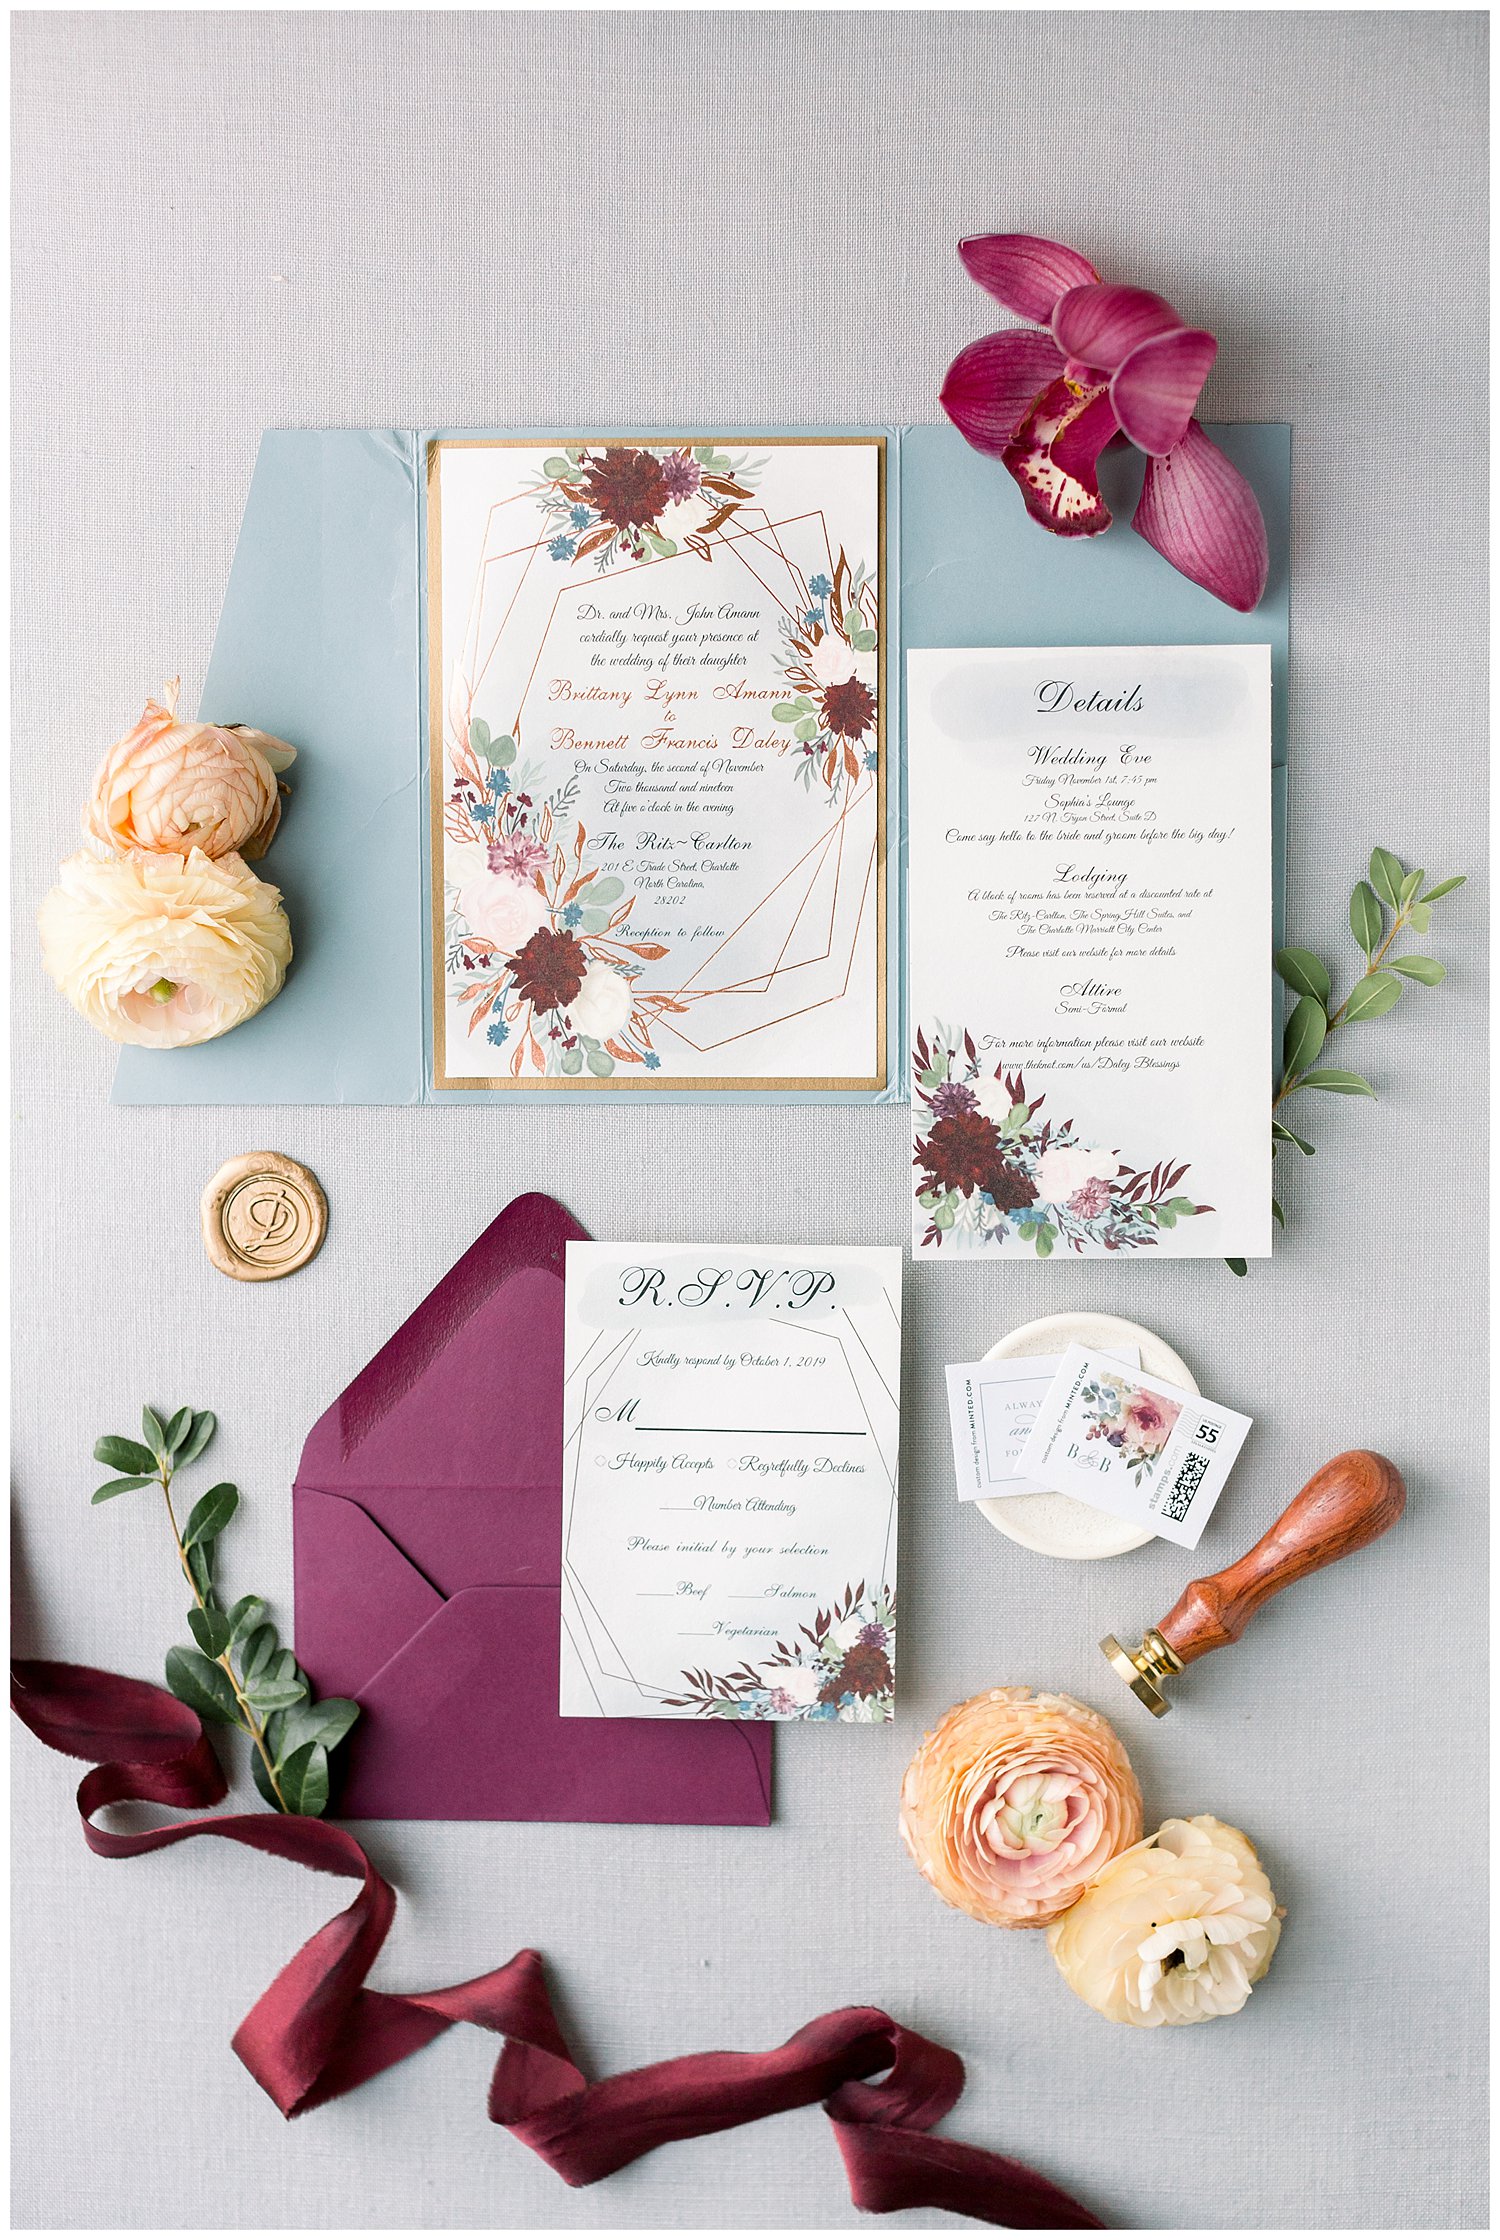 Blue and burgundy wedding invitation suite with wax seal